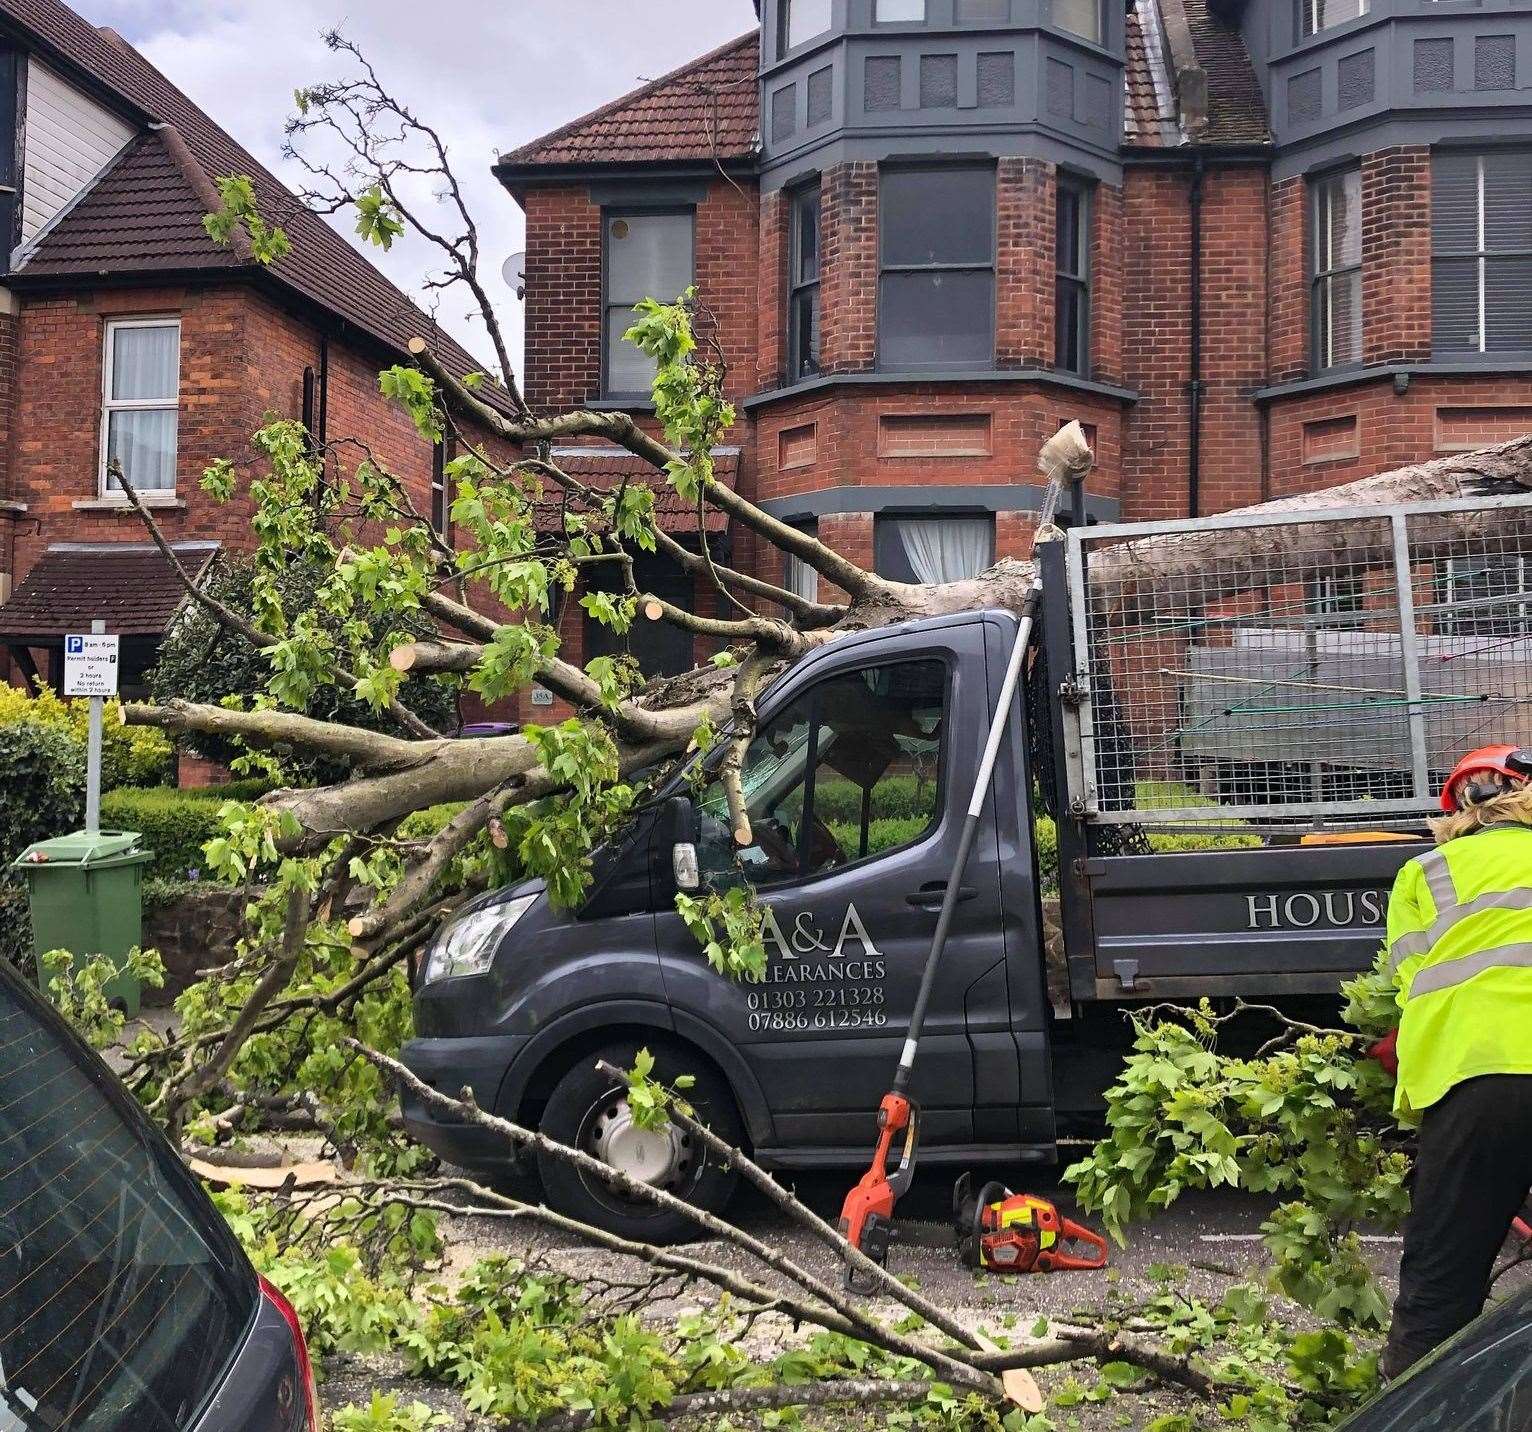 The van for A&A Clearances was parked when the tree hit it. Photo: Peter Phillips